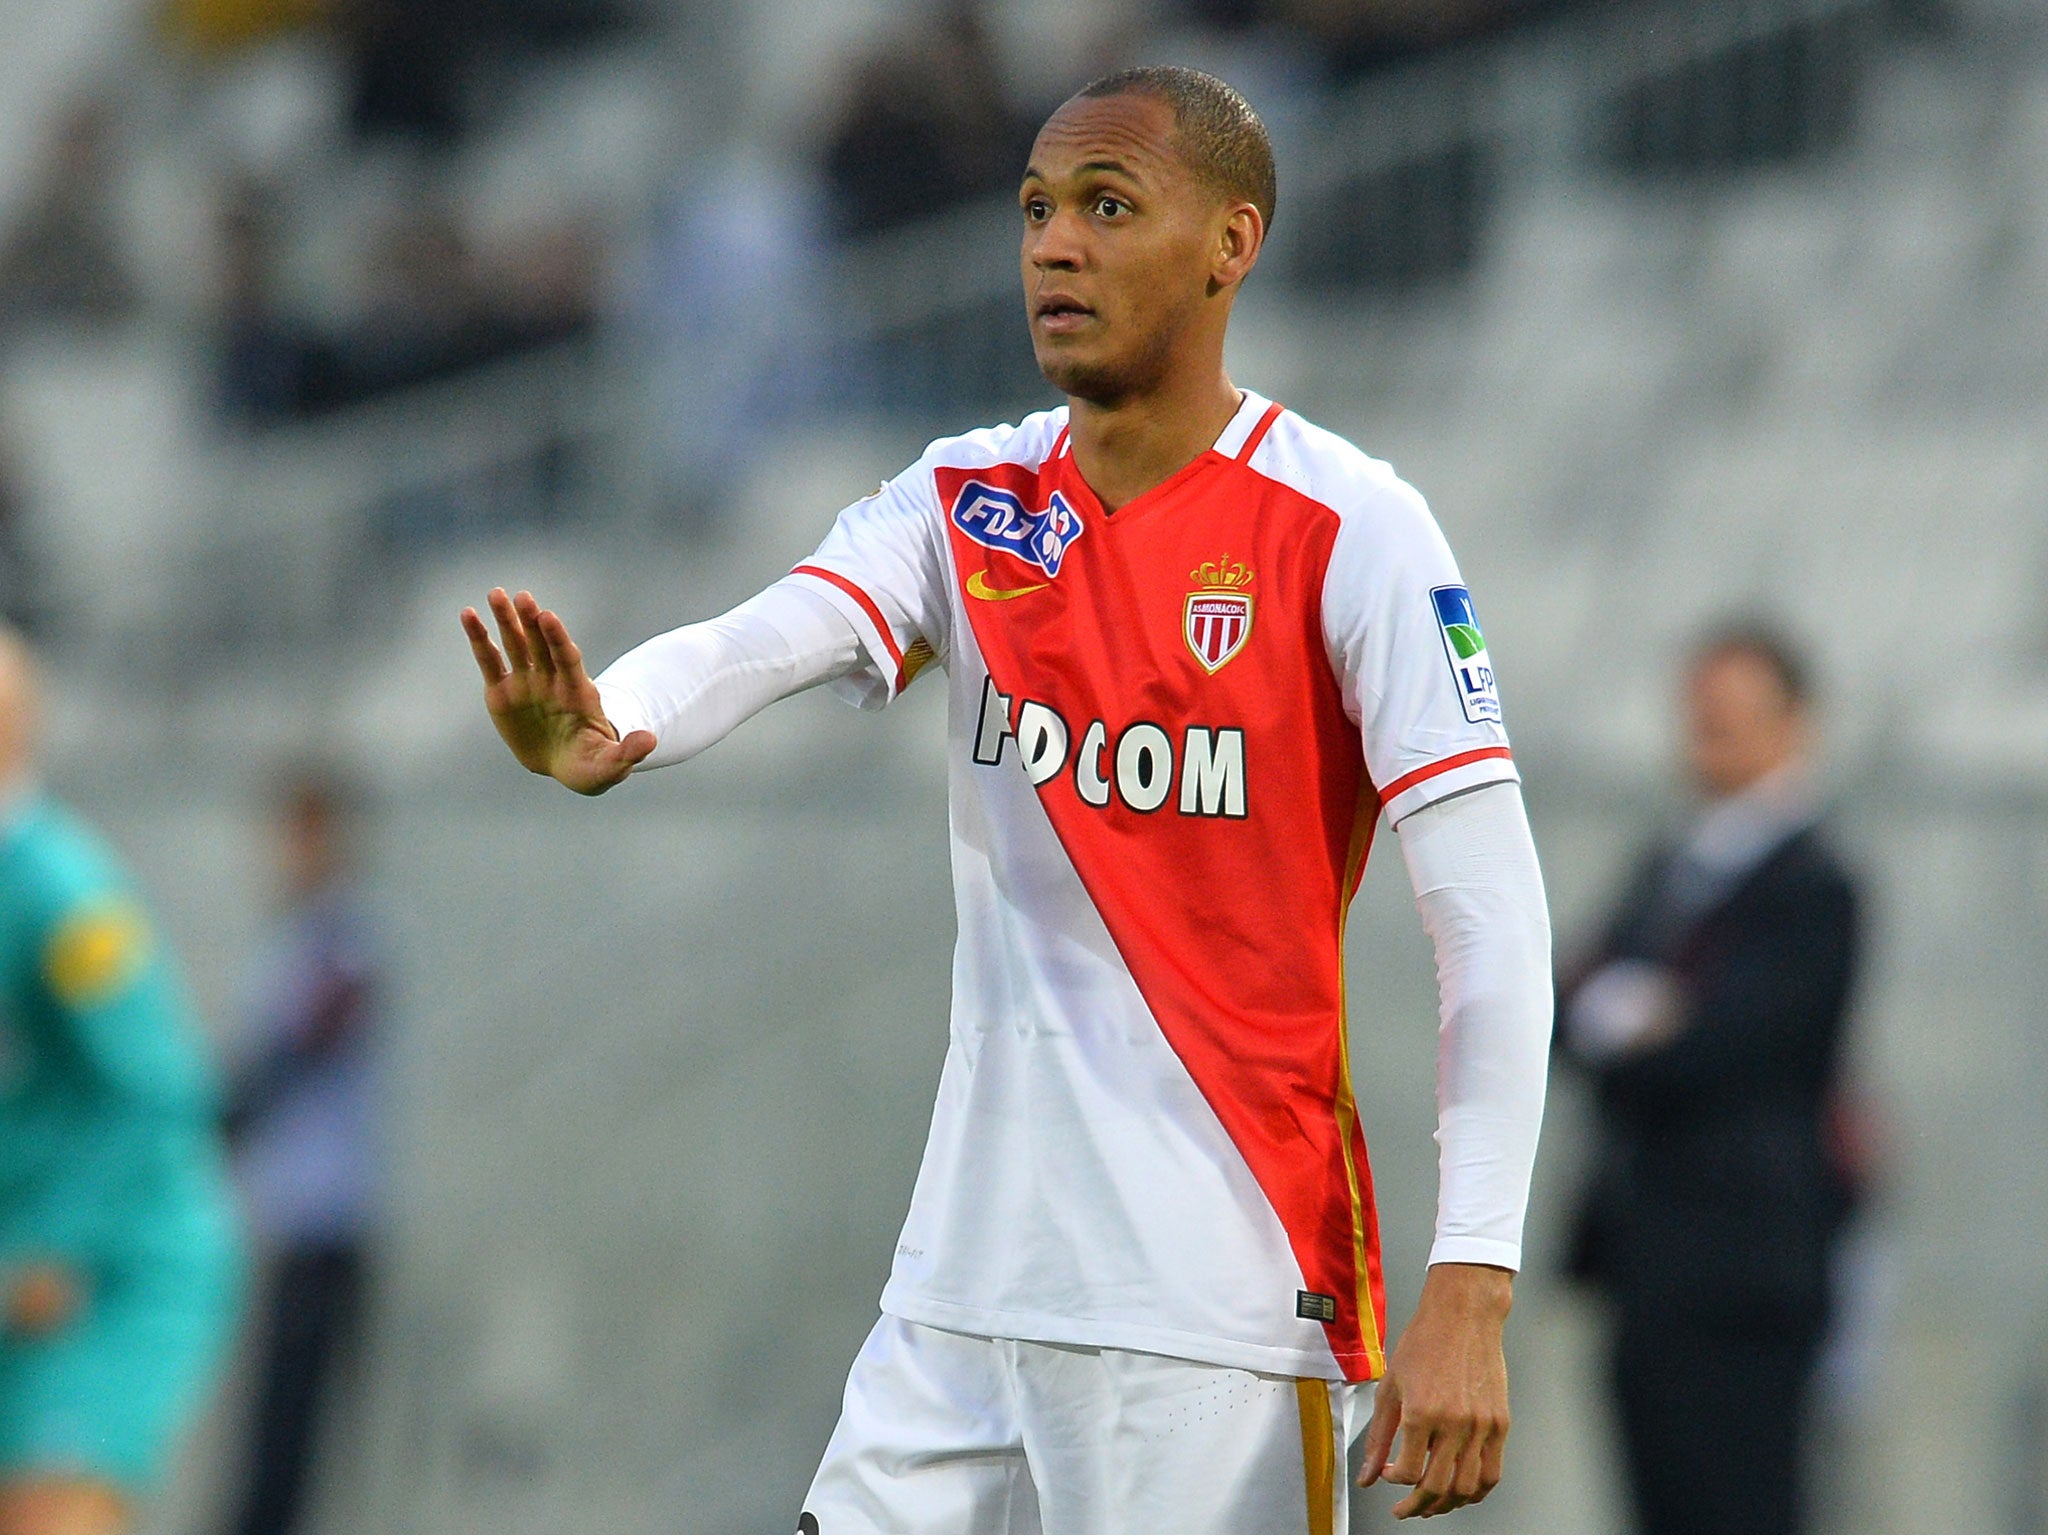 Manchester United have been linked with Monaco's Fabinho